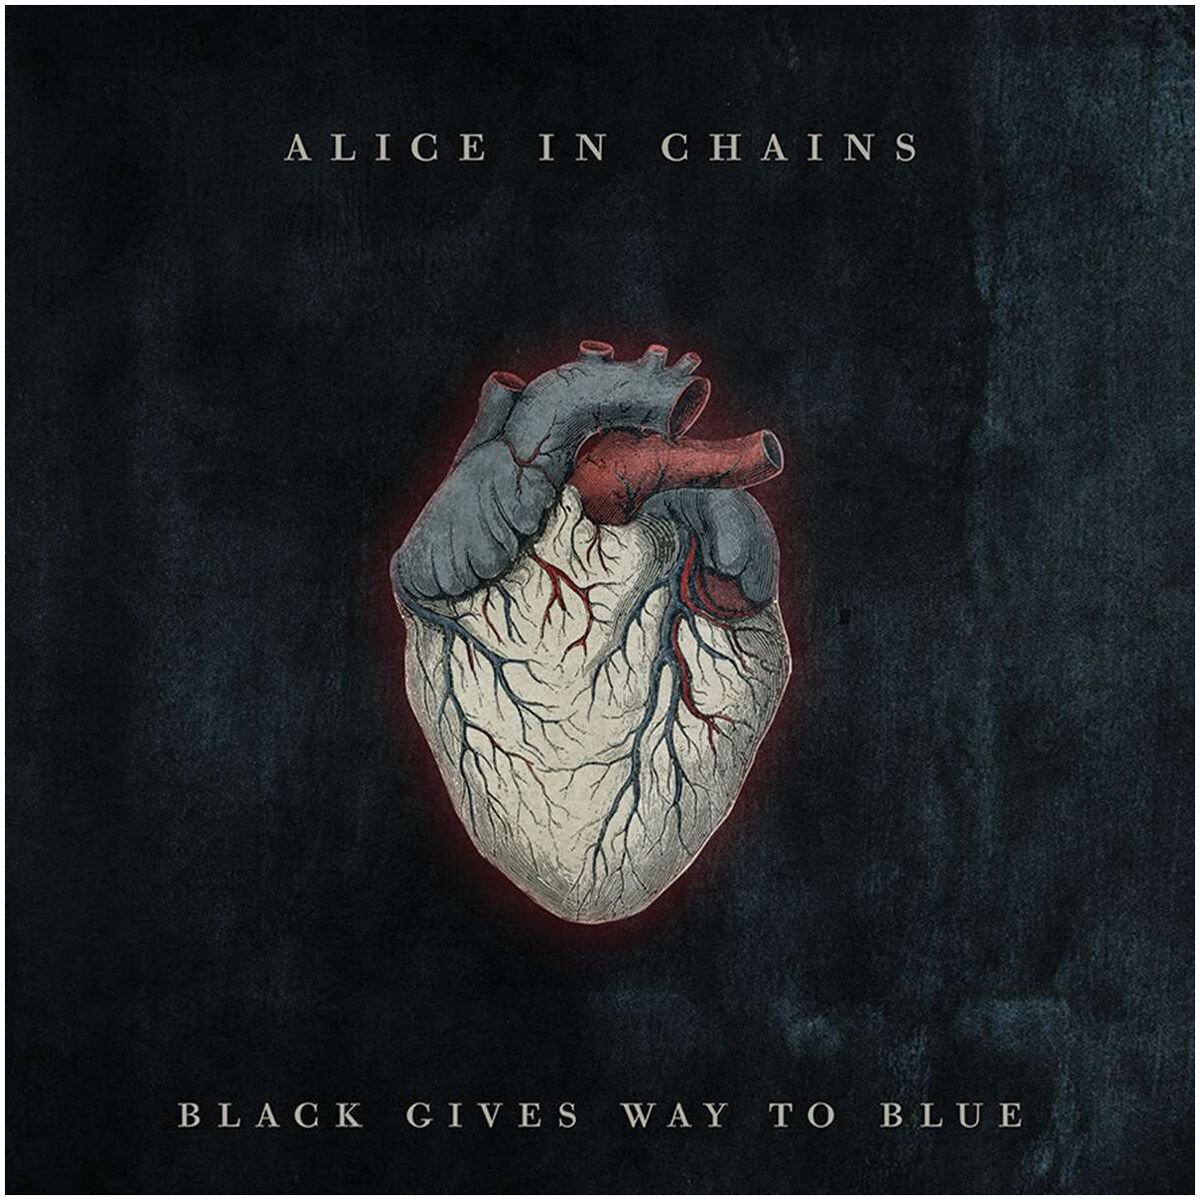 Black gives way to blue, Alice In Chains CD